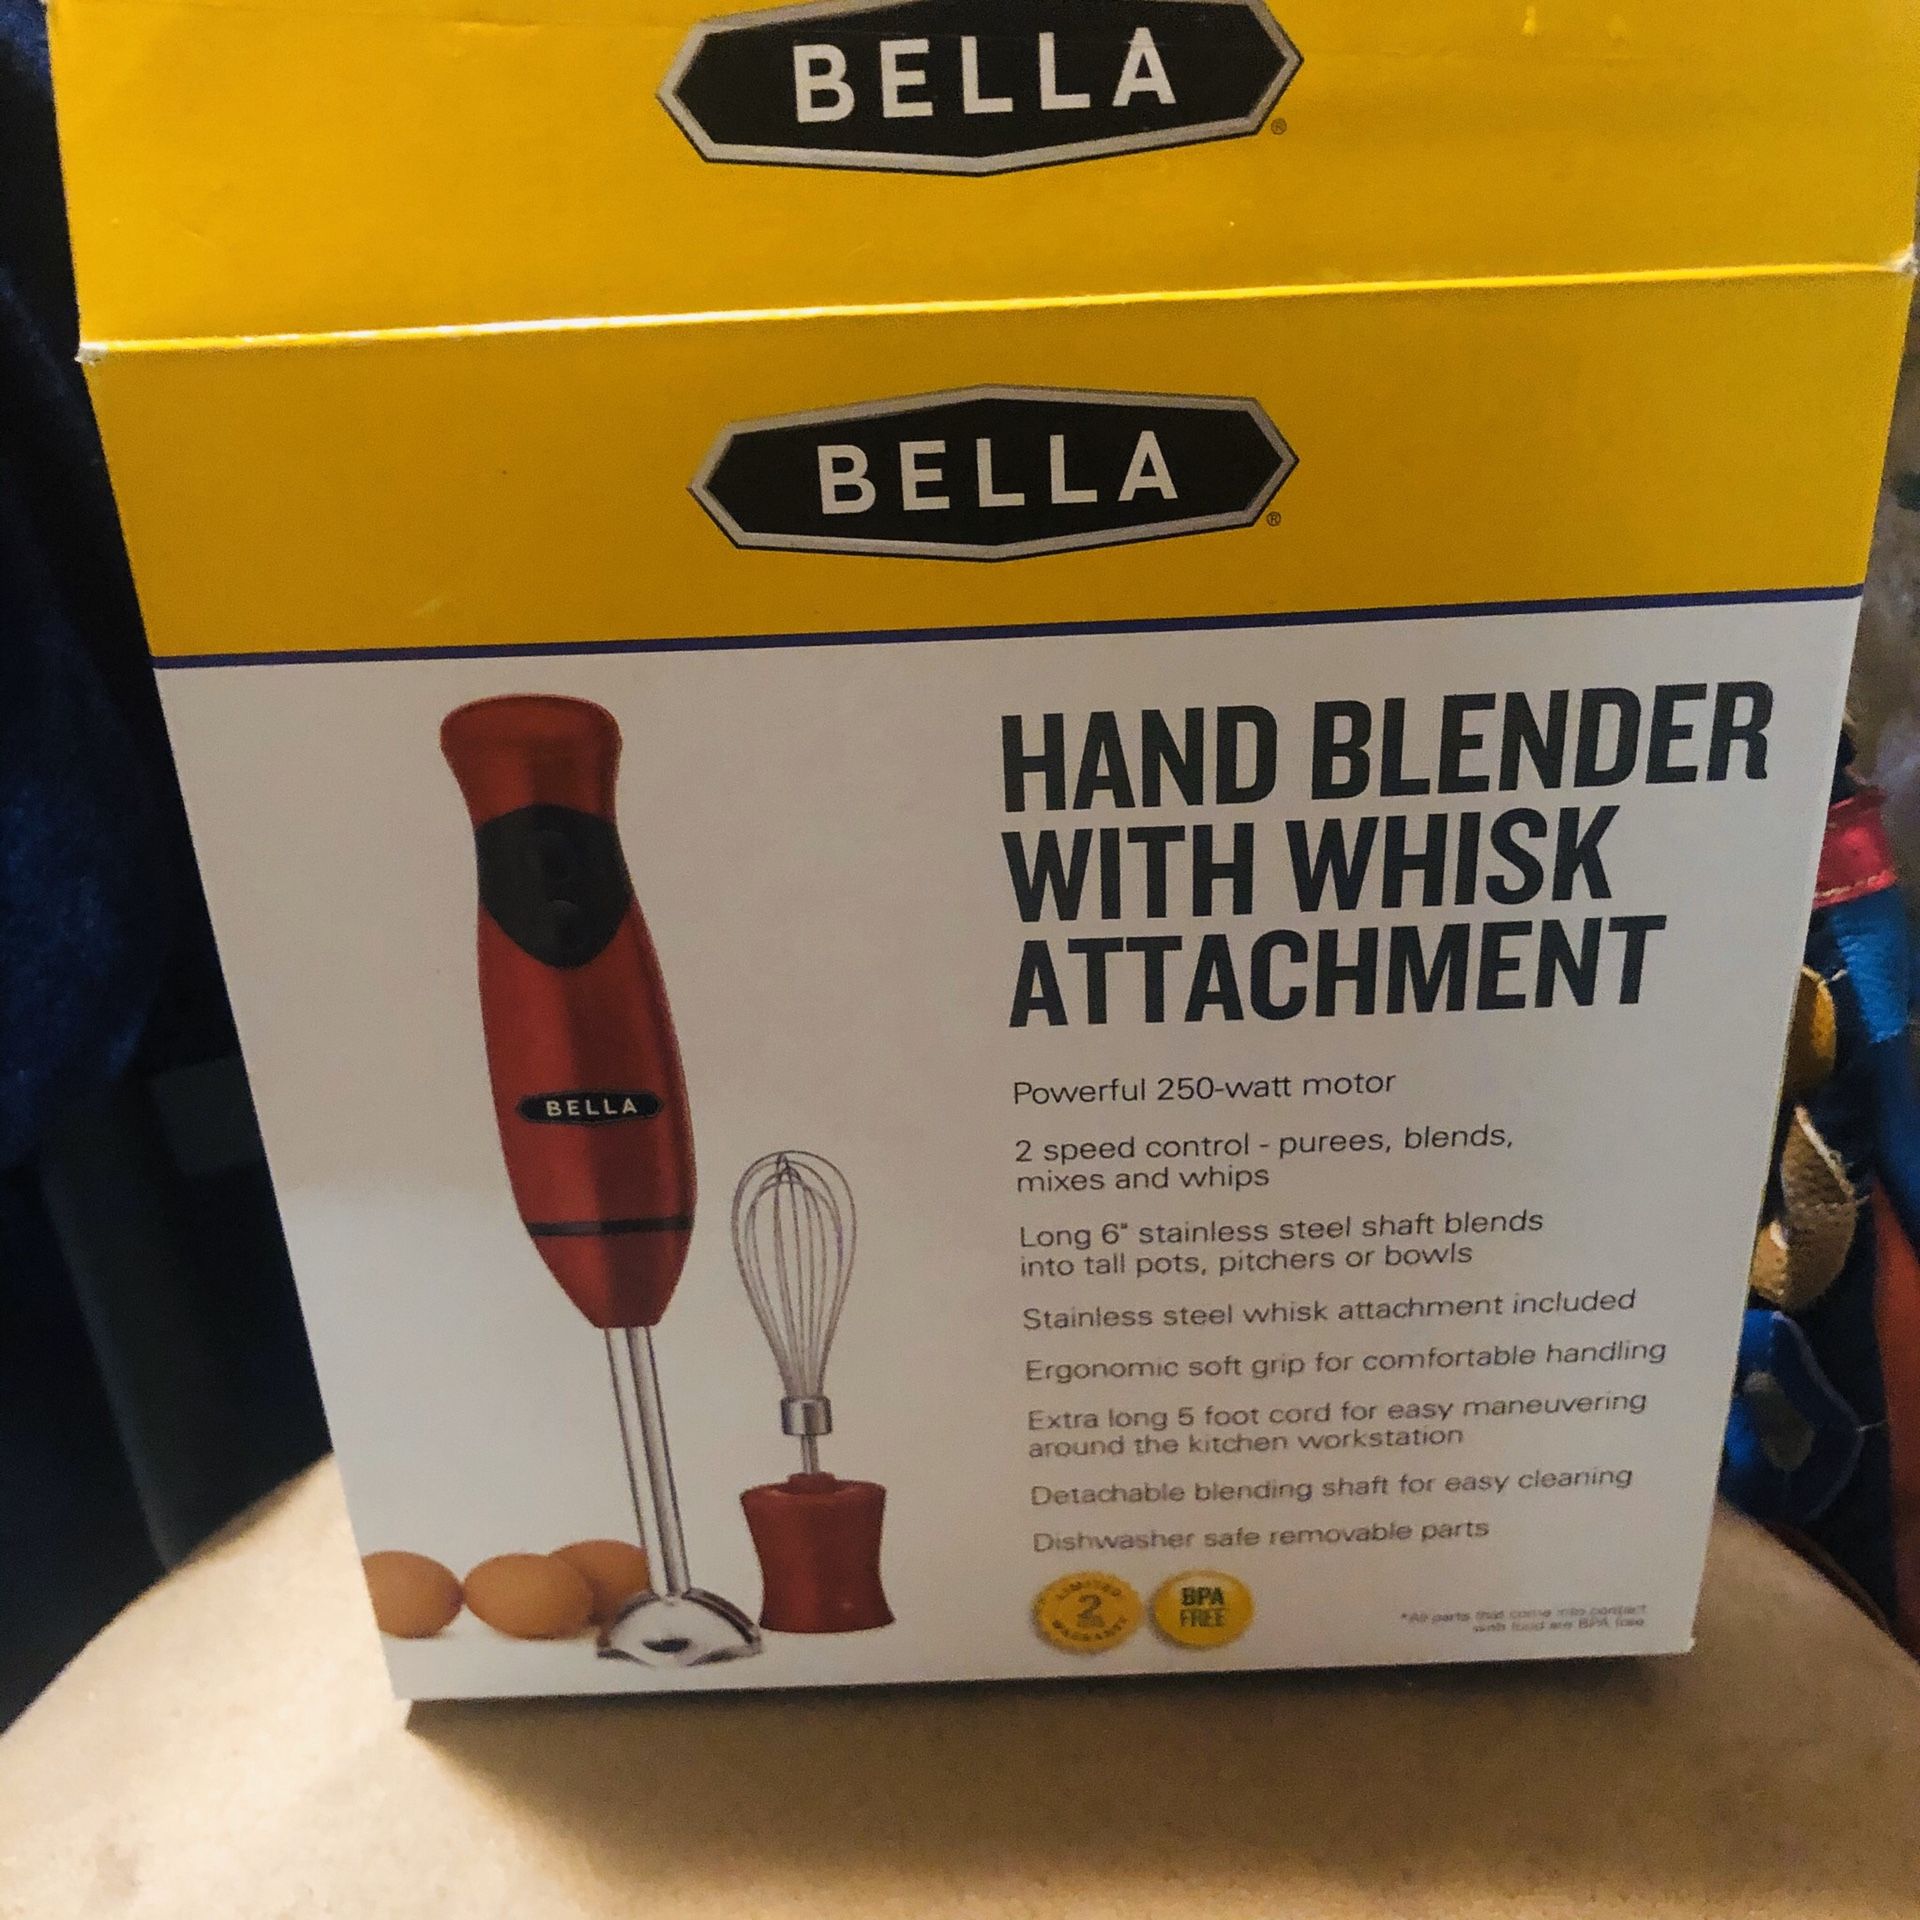 New in opened box Bella Hand Blender with Whisk Attachment